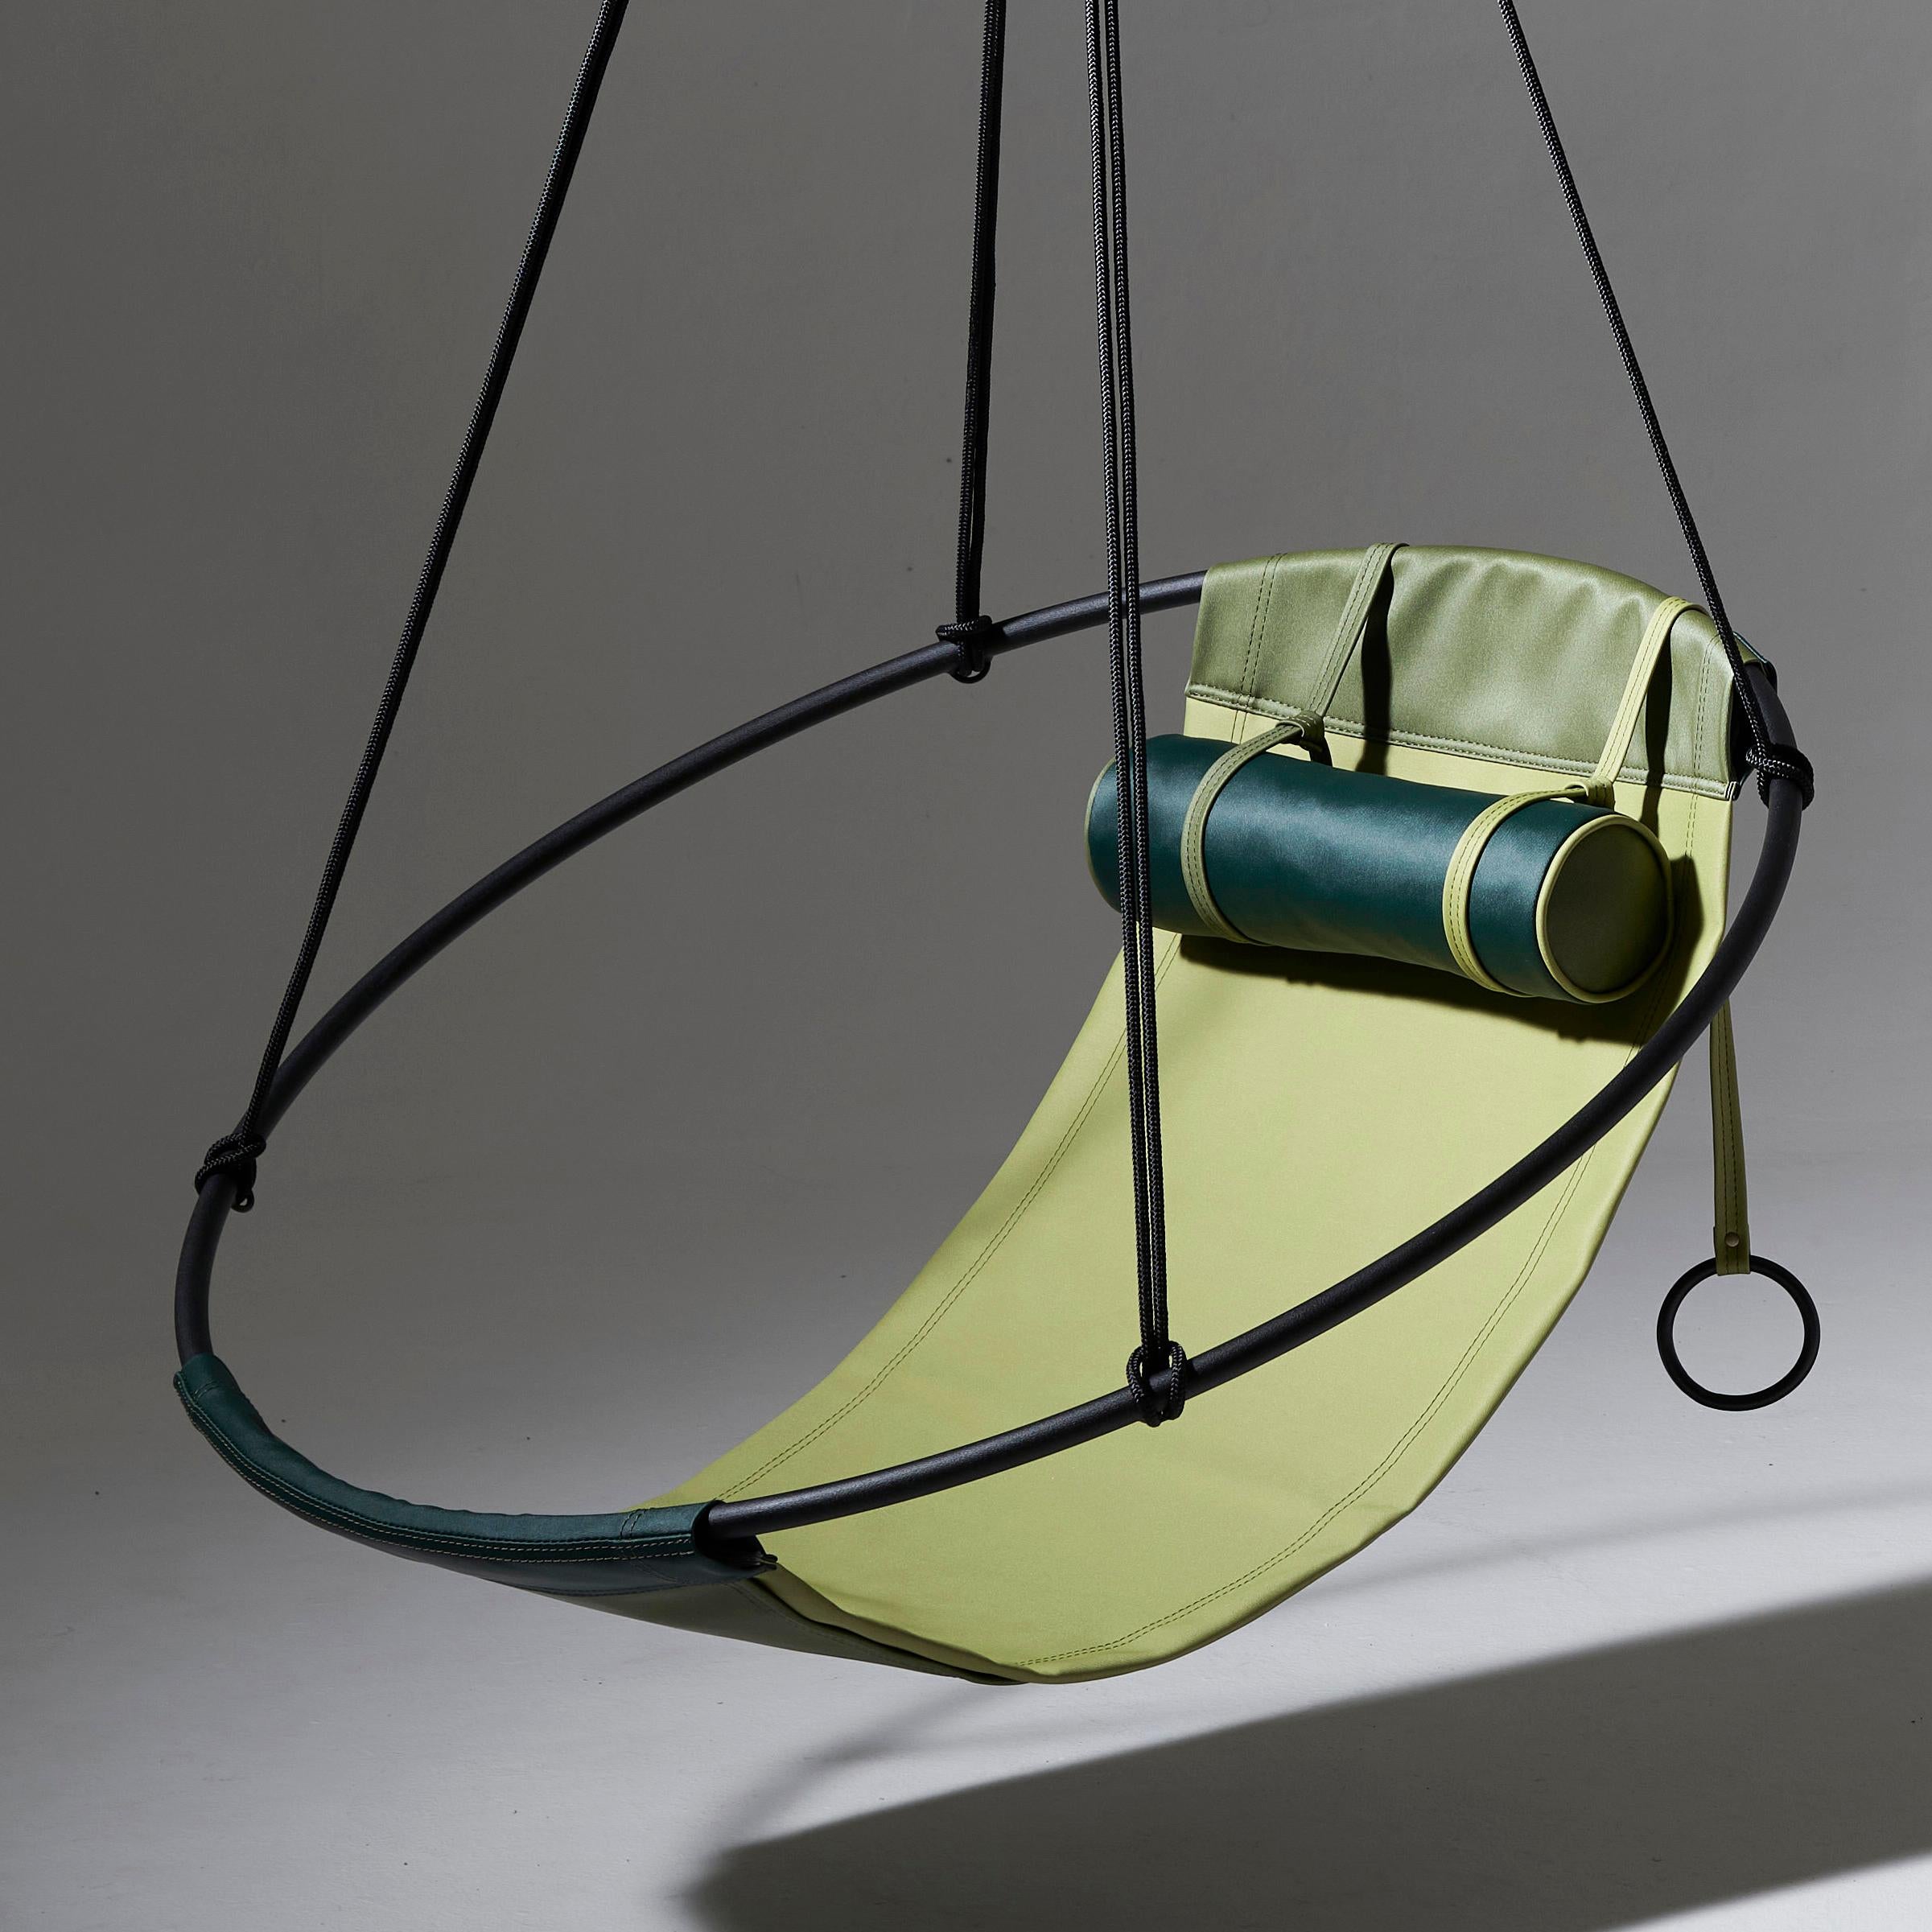 Our Outdoor Sling hanging chair swing seat is crafted with Spradling Silvertex material – a highly sustainable environmentally-friendly vegan material.

The Slings can be ordered as a single but also works together as a pair which is slightly